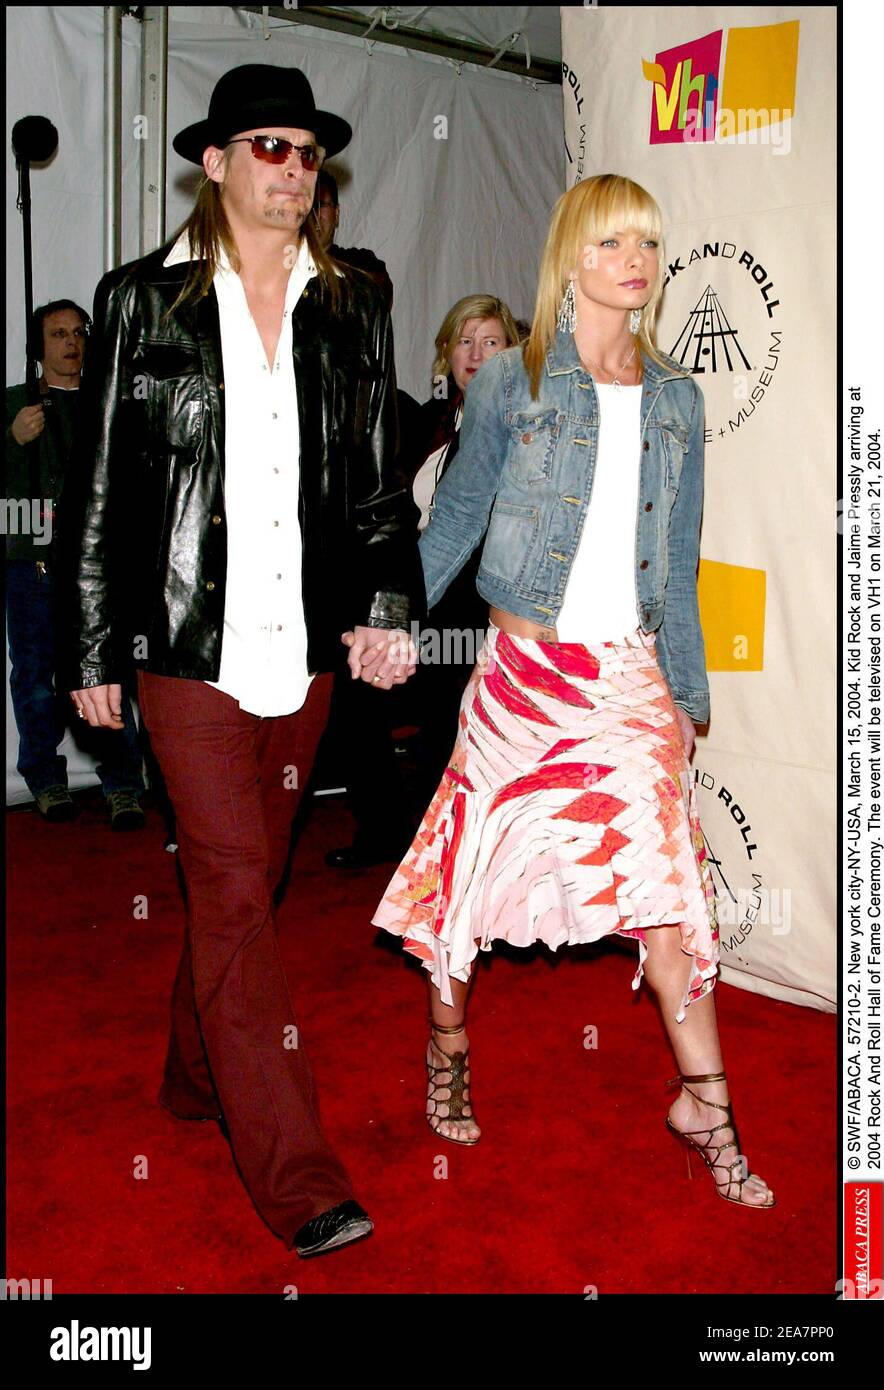 © SWF/ABACA. 57210-2. New york city-NY-USA, March 15, 2004. Kid Rock and Jaime Pressly arriving at 2004 Rock And Roll Hall of Fame Ceremony. The event will be televised on VH1 on March 21, 2004. Stock Photo